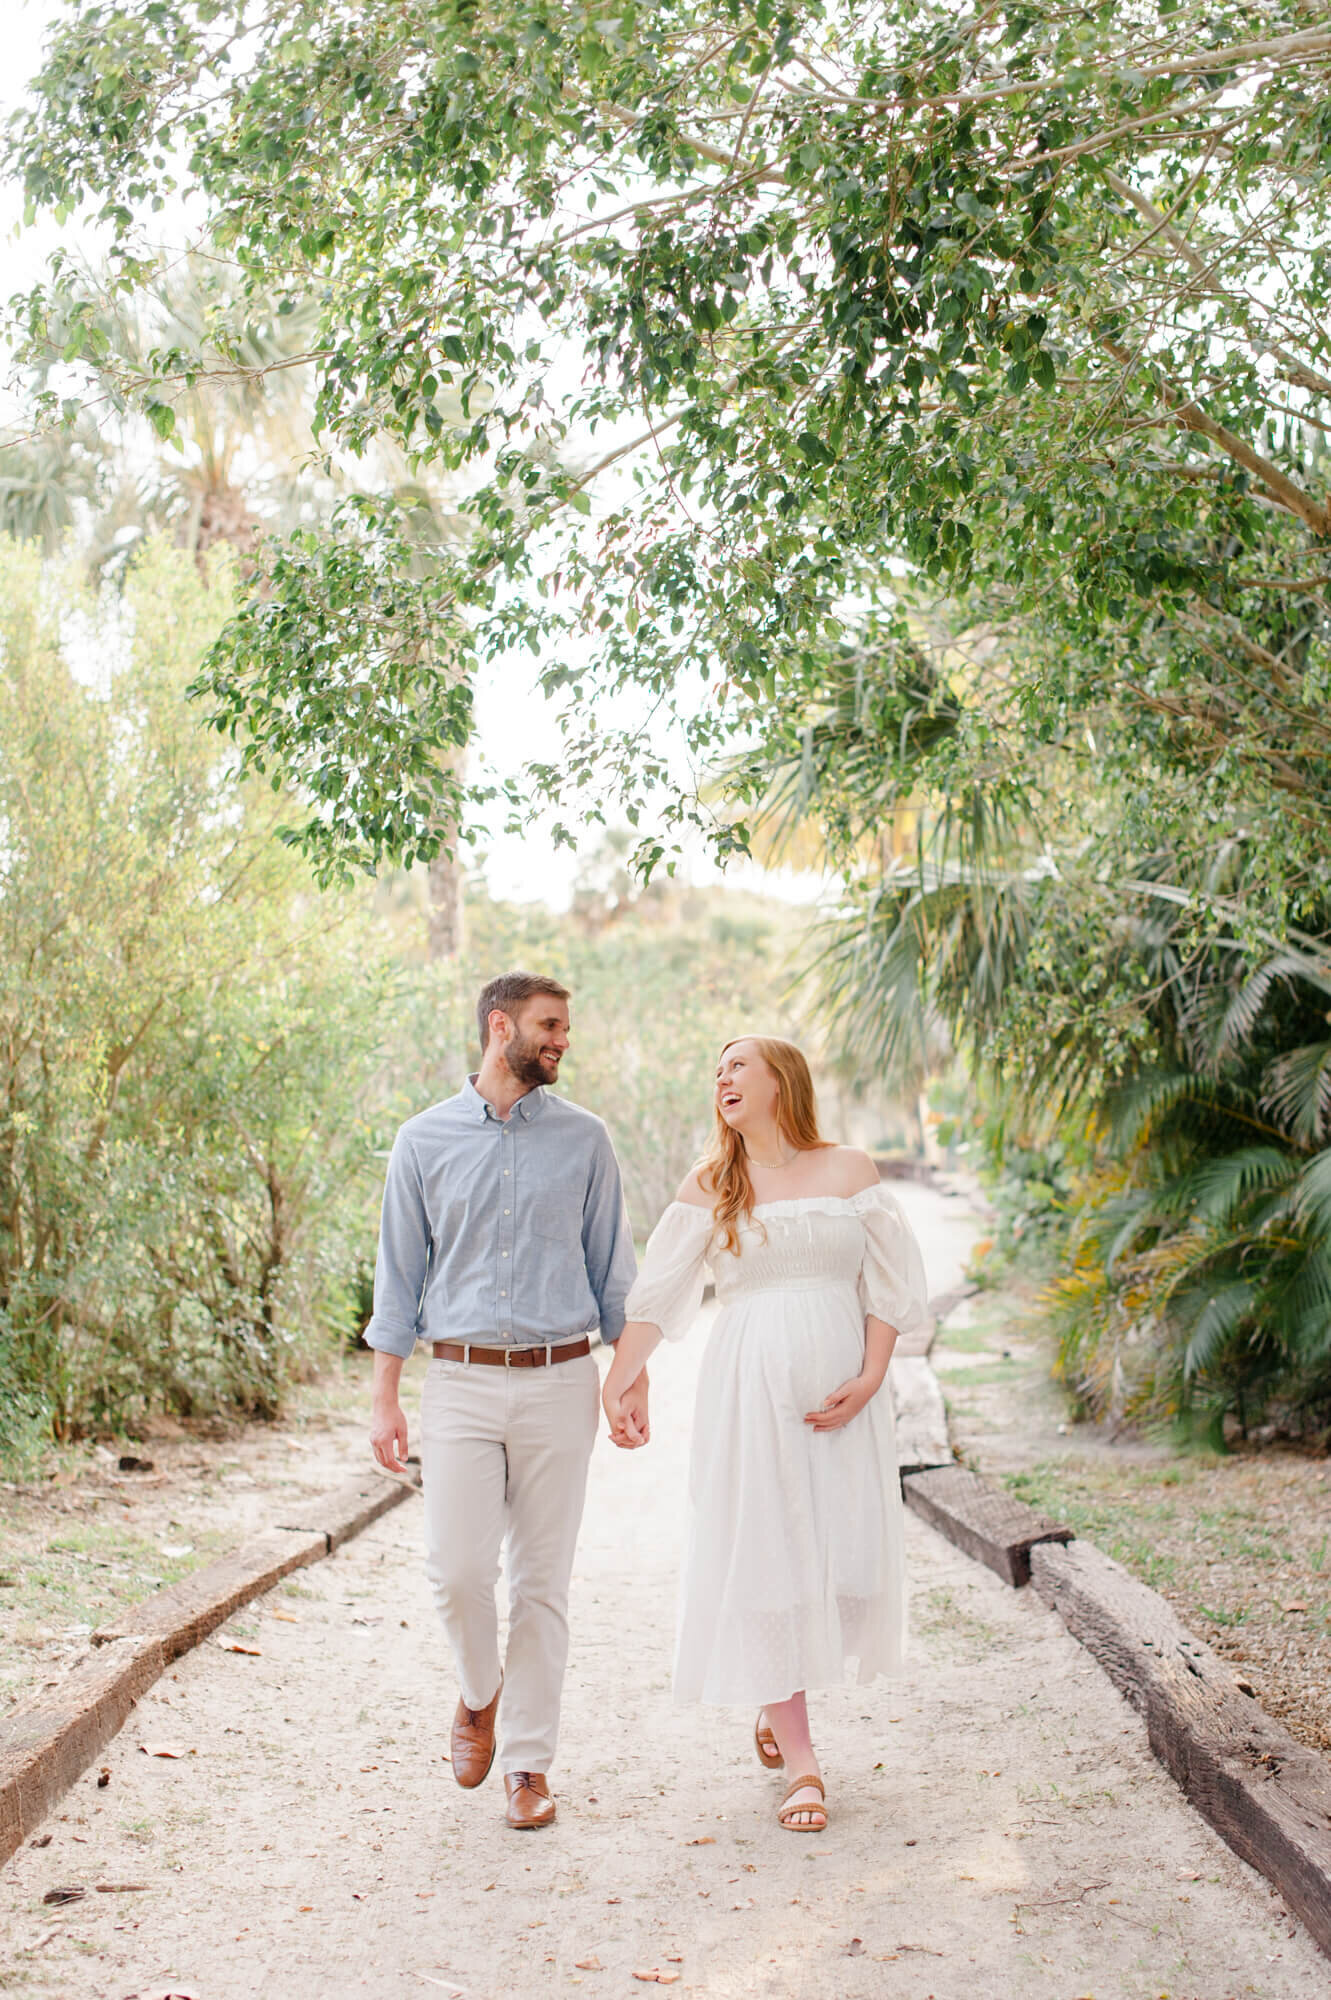 Pregnant mom holds her husbands hand and walks on a beautiful greenery beach path during their maternity photoshoot